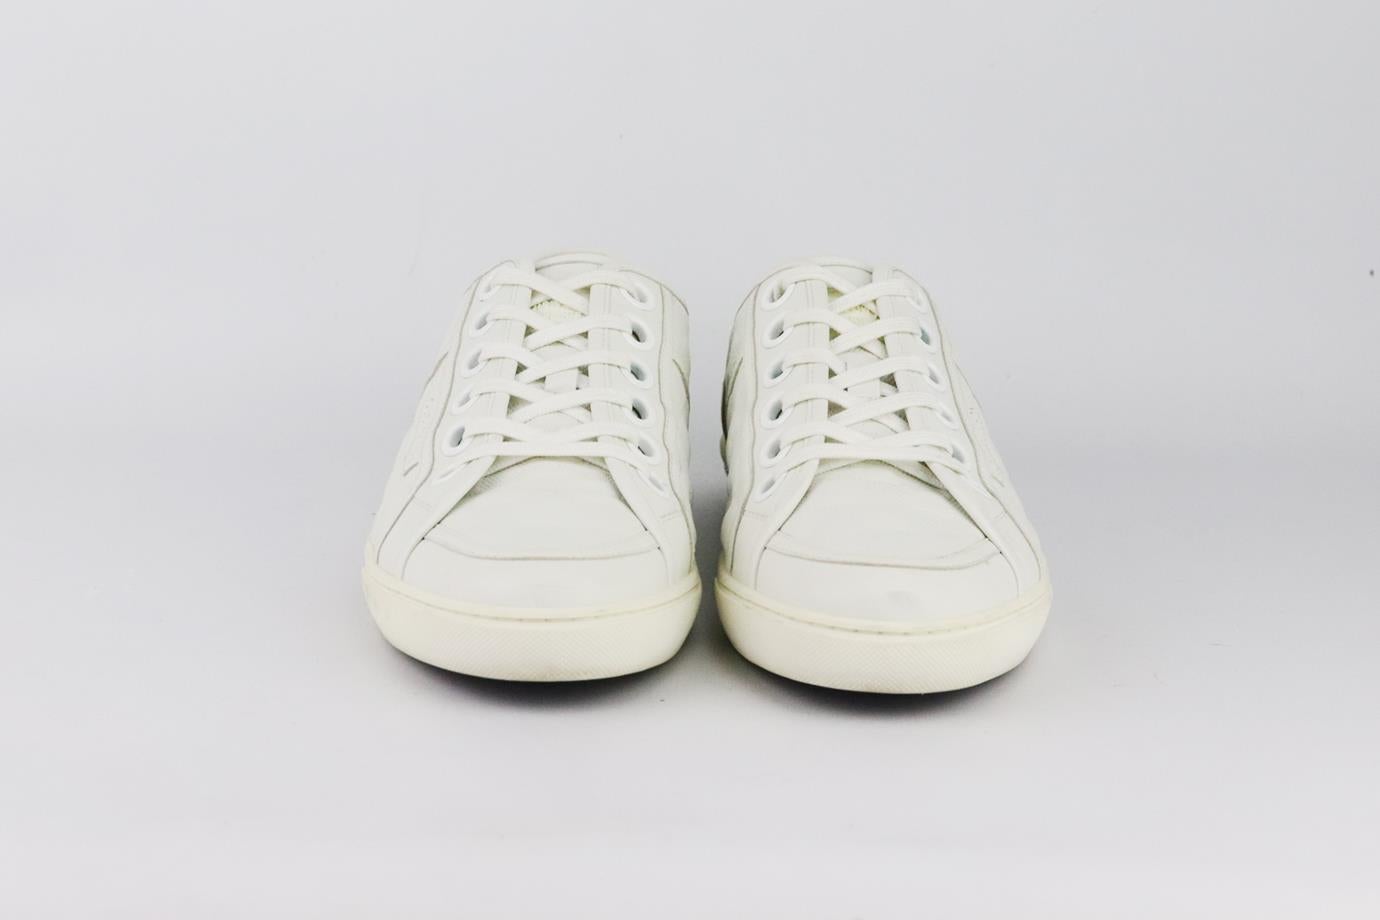 These low-profile sneakers by Louis Vuitton are made from soft white leather with brand’s iconic embossed detail on the sides. Heel measures approximately 25 mm/ 1 inches. White leather. Lace fastening at front. Does not come with box or dustbag.